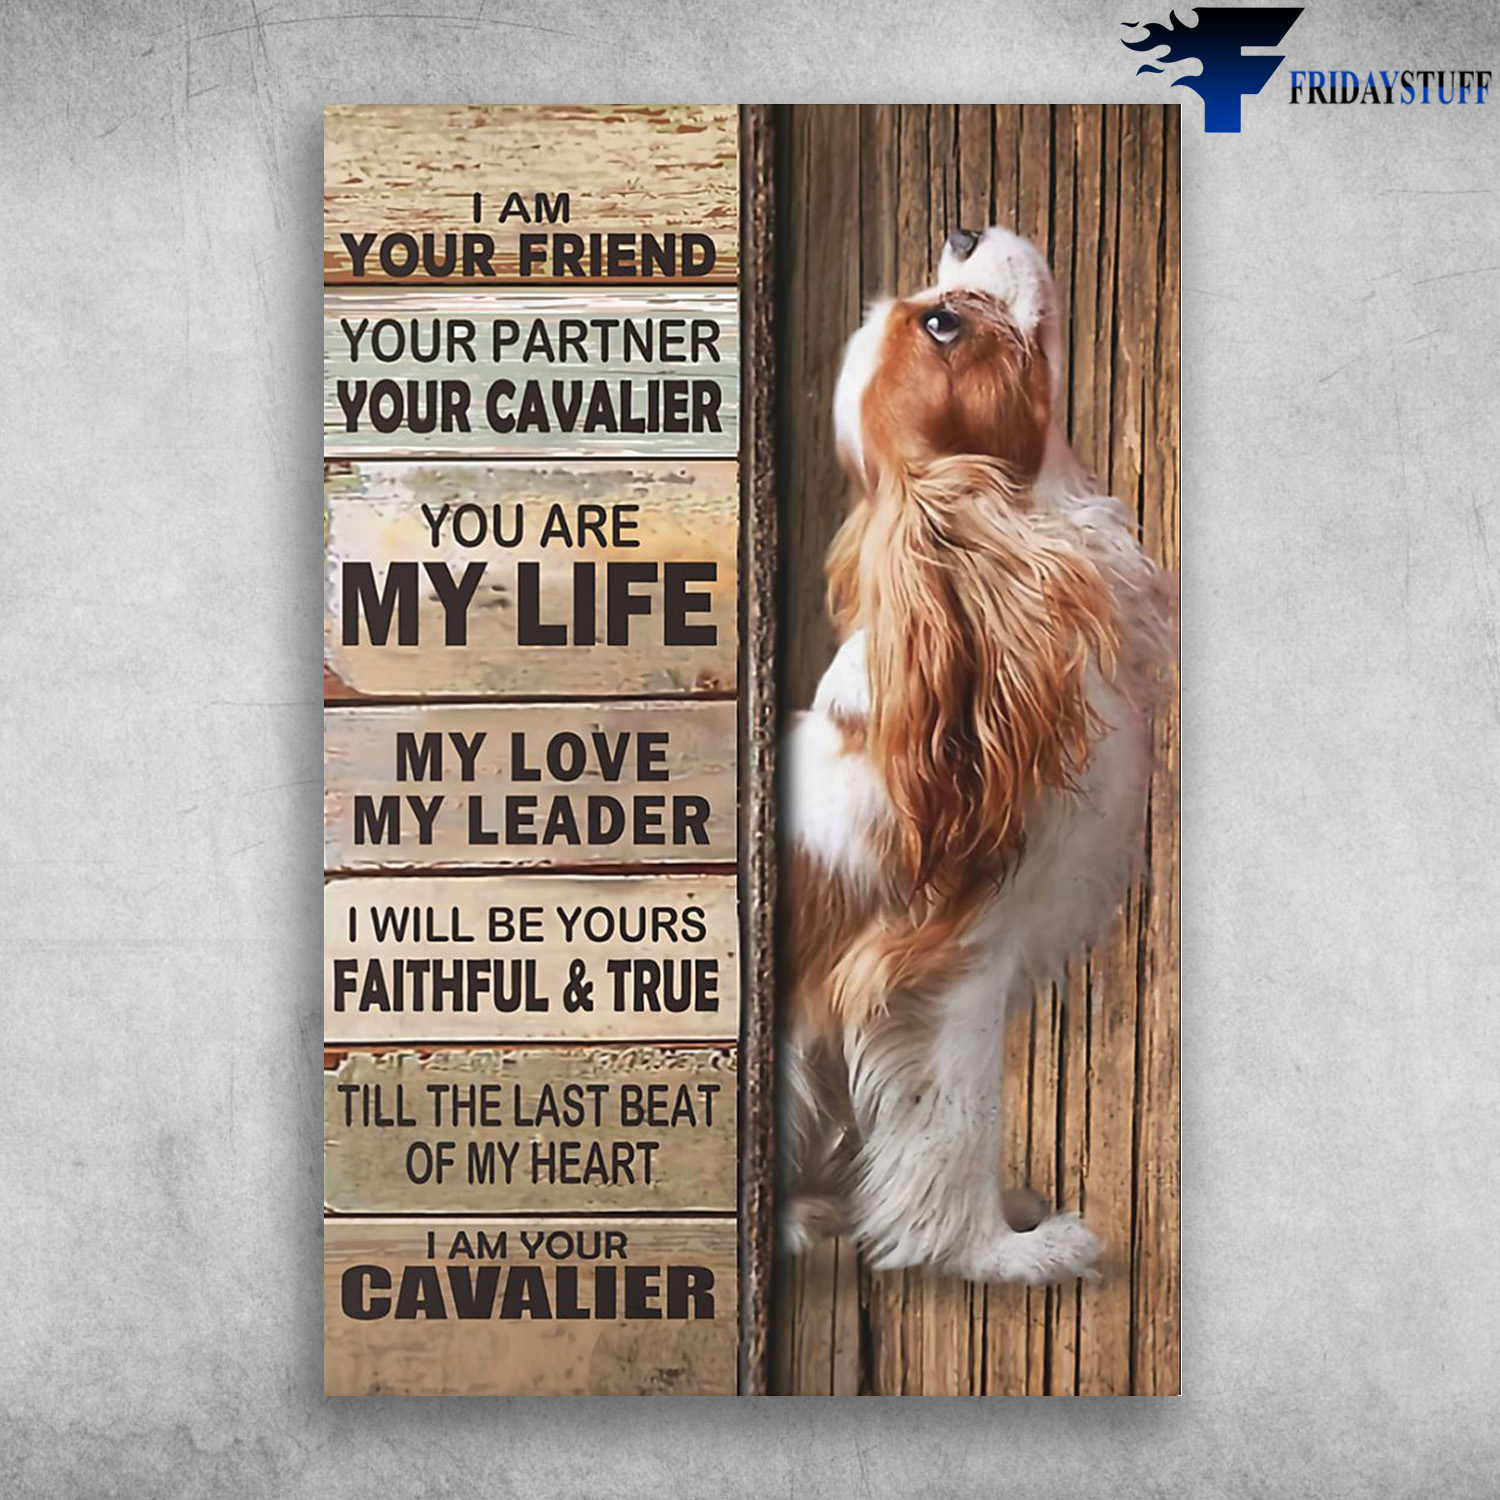 Cavalier King Charles - I Am Your Friend, Your Partner, Your Cavalier. You Are My Life, My Love, My Leader, I Will Be Yours Faithful And True, Till The Last Beat Of My Heart, I Am Your Cavalier